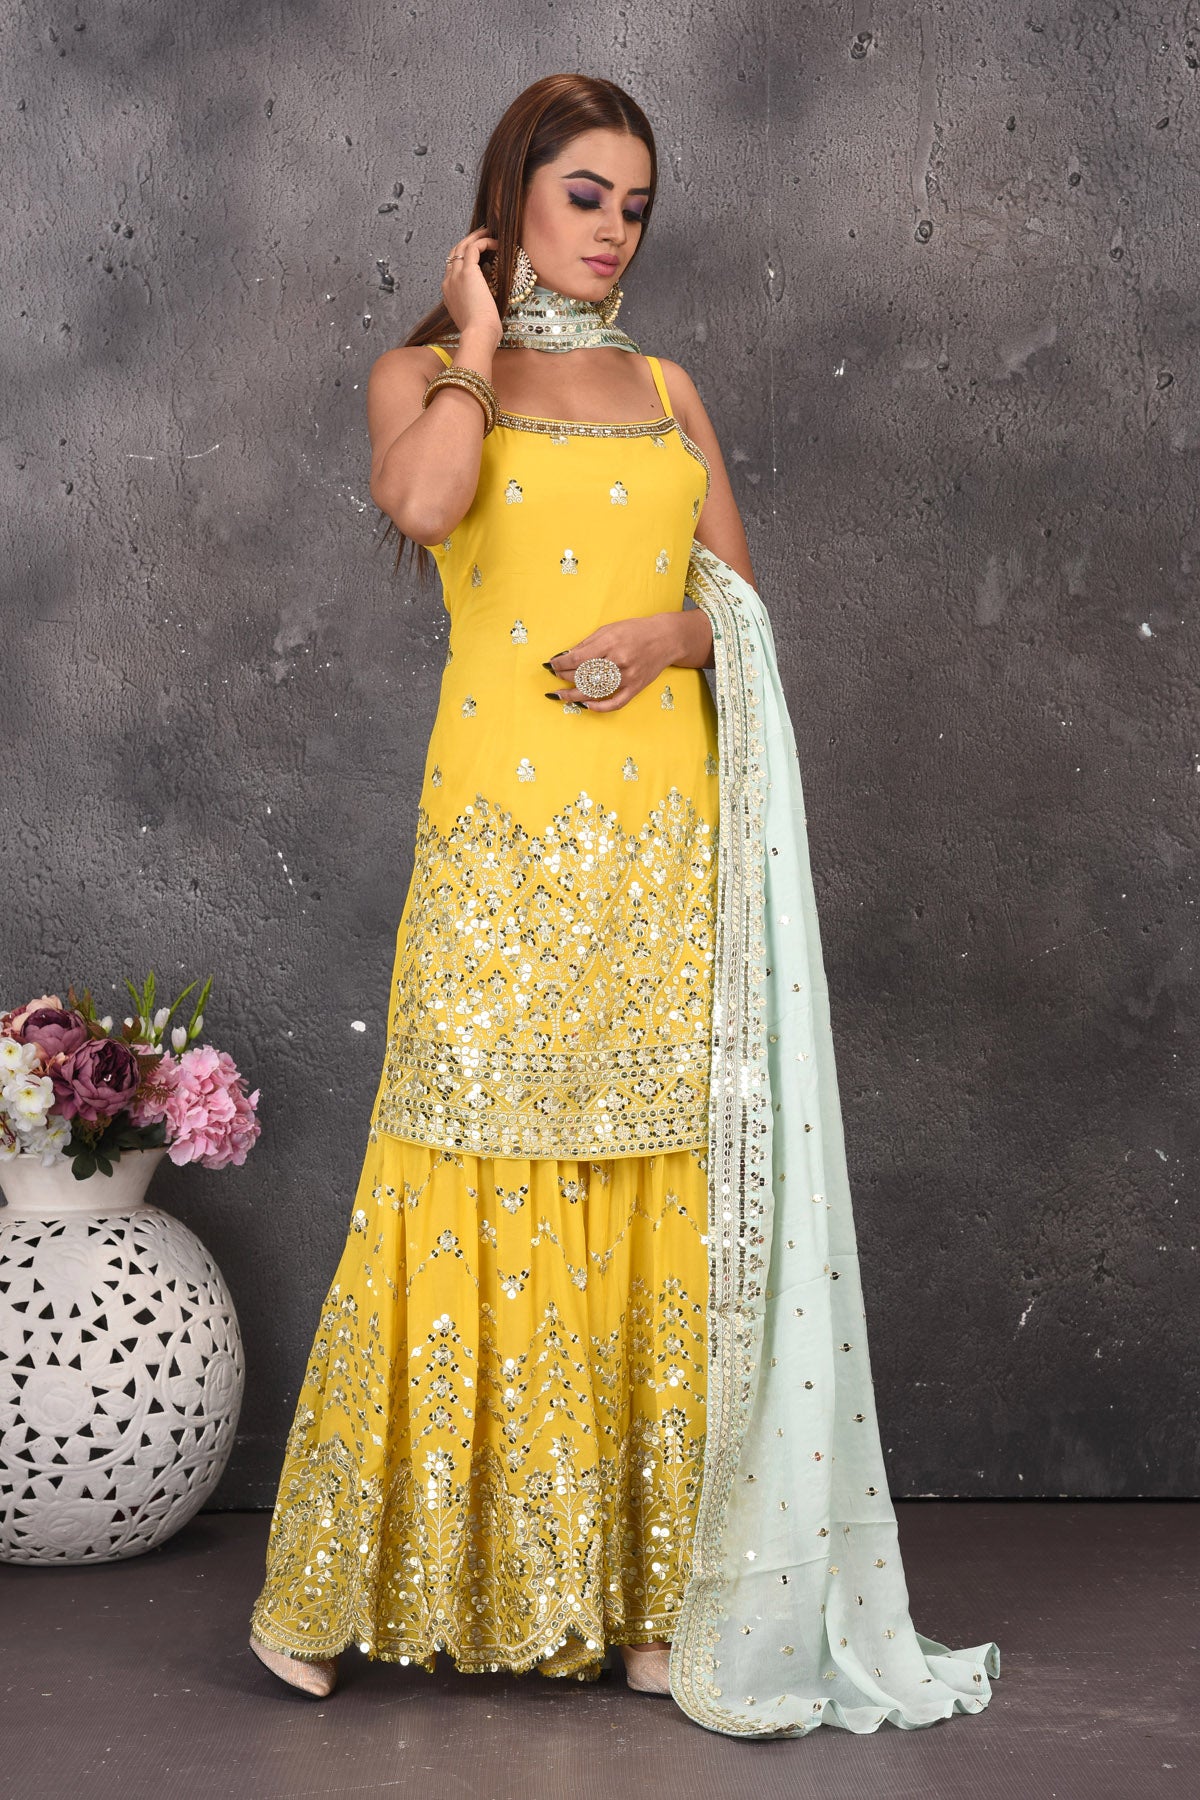 Shop stunning yellow mirror work sharara suit online in USA with powder blue dupatta. Look stylish at parties and wedding festivities in designer dresses, Indowestern outfits, Anarkali suits, wedding lehengas, palazzo suits, sharara suits from Pure Elegance Indian clothing store in USA.-dupatta